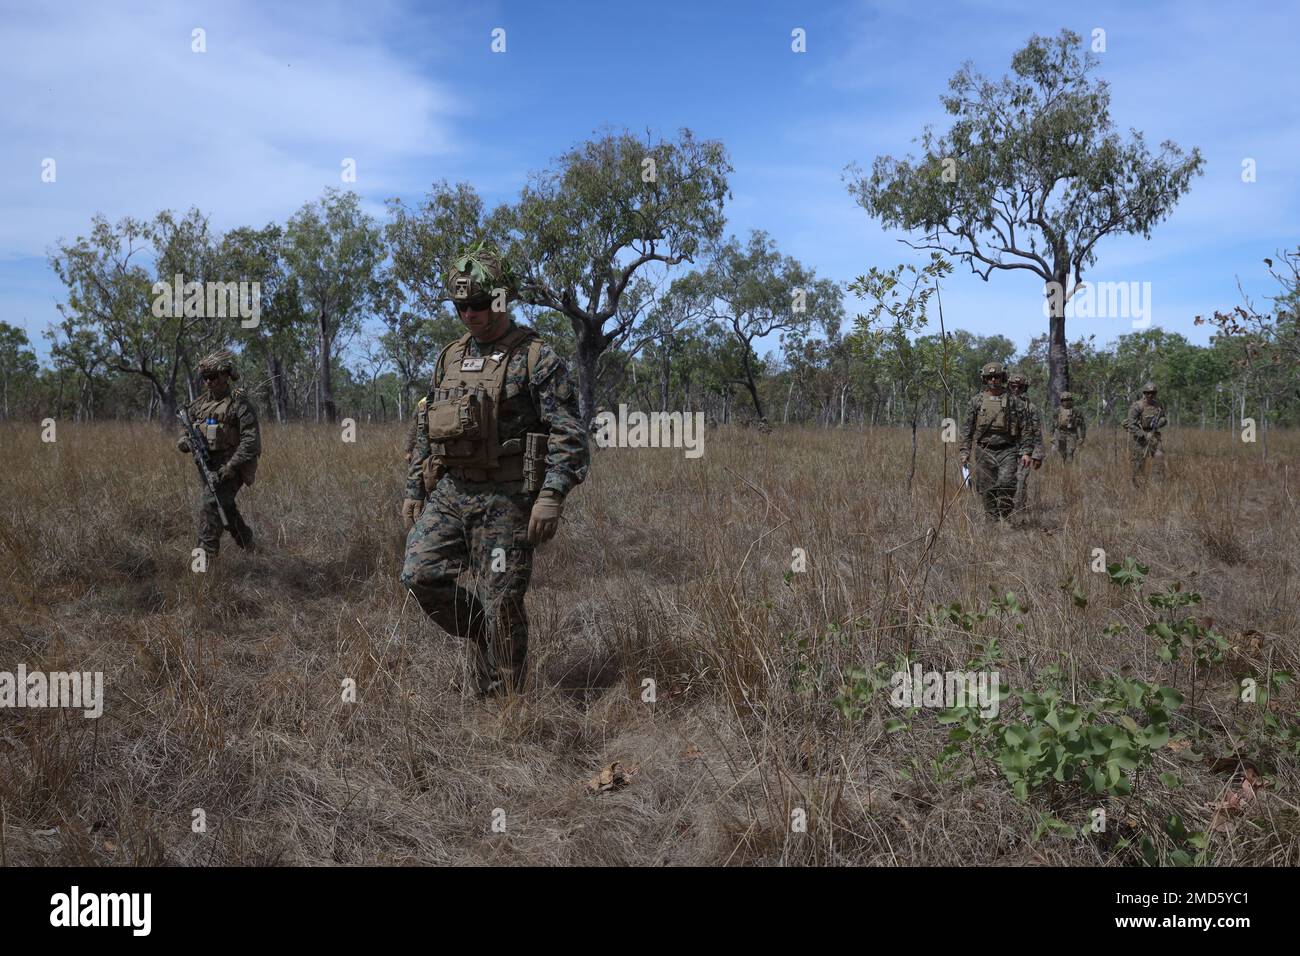 U.S. Marines with Lima Co., 3d Battalion, 7th Marine Regiment, Ground Combat Element, Marine Rotational Force-Darwin 22, patrol towards an objective during company attacks as part of exercise Koolendong 22 at Mount Bundey Training Area, NT, Australia, July 13, 2022. Exercise Koolendong 22 is a combined and joint force exercise focused on expeditionary advanced base operations conducted by U.S. Marines, U.S. Soldiers, U.S. Airmen, and Australian Defence Force personnel. Stock Photo